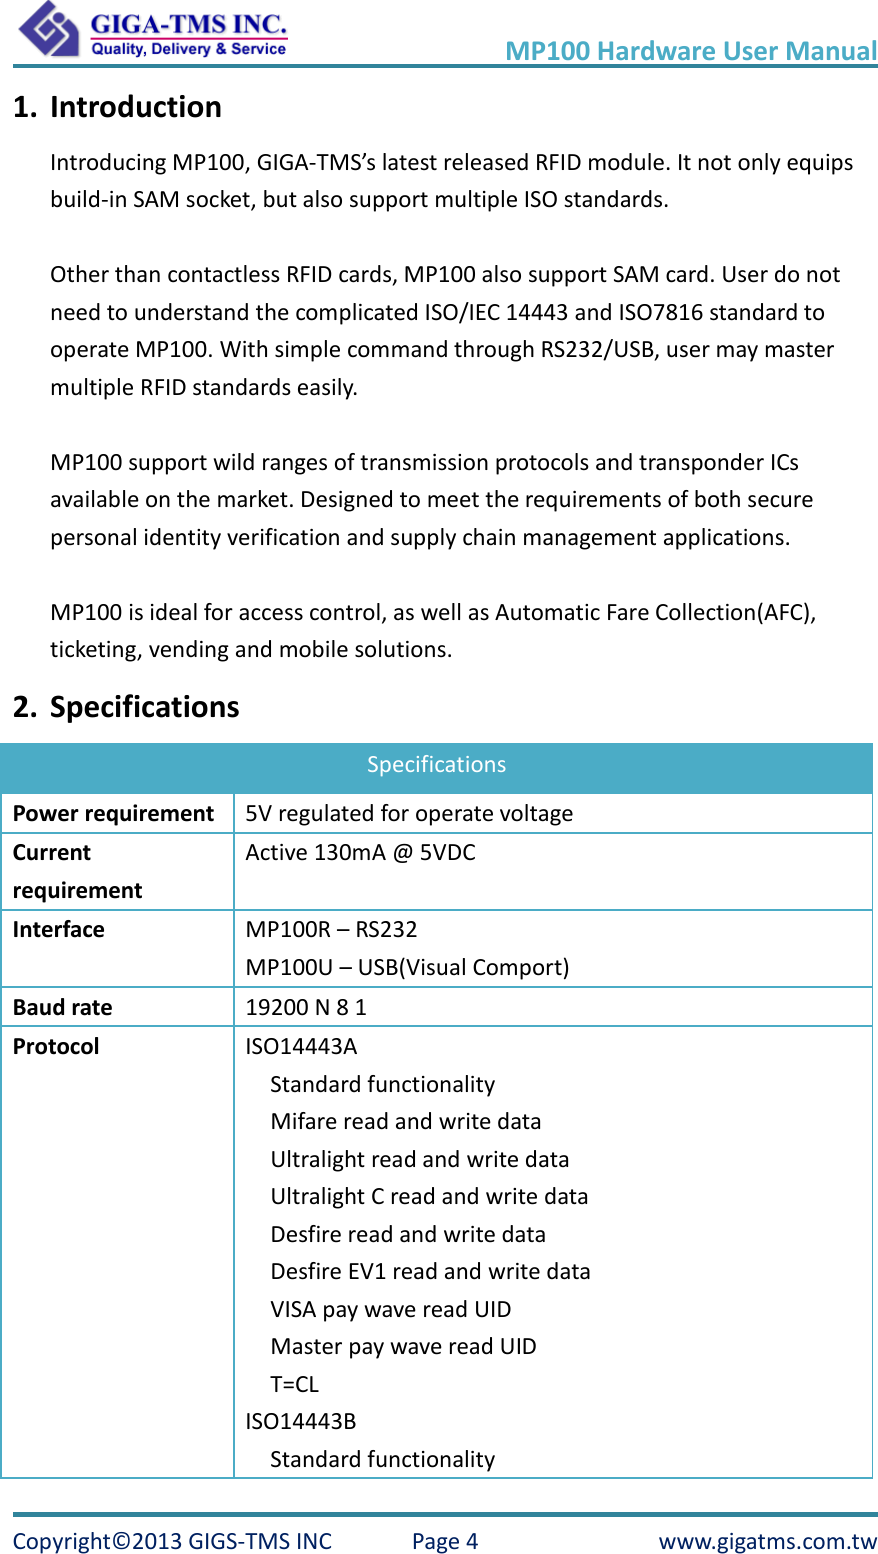     MP100 Hardware User Manual Copyright© 2013 GIGS-TMS INC  Page 4  www.gigatms.com.tw 1. Introduction Introducing MP100, GIGA-TMS’s latest released RFID module. It not only equips build-in SAM socket, but also support multiple ISO standards.  Other than contactless RFID cards, MP100 also support SAM card. User do not need to understand the complicated ISO/IEC 14443 and ISO7816 standard to operate MP100. With simple command through RS232/USB, user may master multiple RFID standards easily.  MP100 support wild ranges of transmission protocols and transponder ICs available on the market. Designed to meet the requirements of both secure personal identity verification and supply chain management applications.  MP100 is ideal for access control, as well as Automatic Fare Collection(AFC), ticketing, vending and mobile solutions. 2. Specifications Specifications Power requirement 5V regulated for operate voltage Current requirement Active 130mA @ 5VDC Interface MP100R – RS232 MP100U – USB(Visual Comport) Baud rate 19200 N 8 1 Protocol ISO14443A   Standard functionality Mifare read and write data Ultralight read and write data Ultralight C read and write data Desfire read and write data Desfire EV1 read and write data VISA pay wave read UID Master pay wave read UID T=CL ISO14443B   Standard functionality 